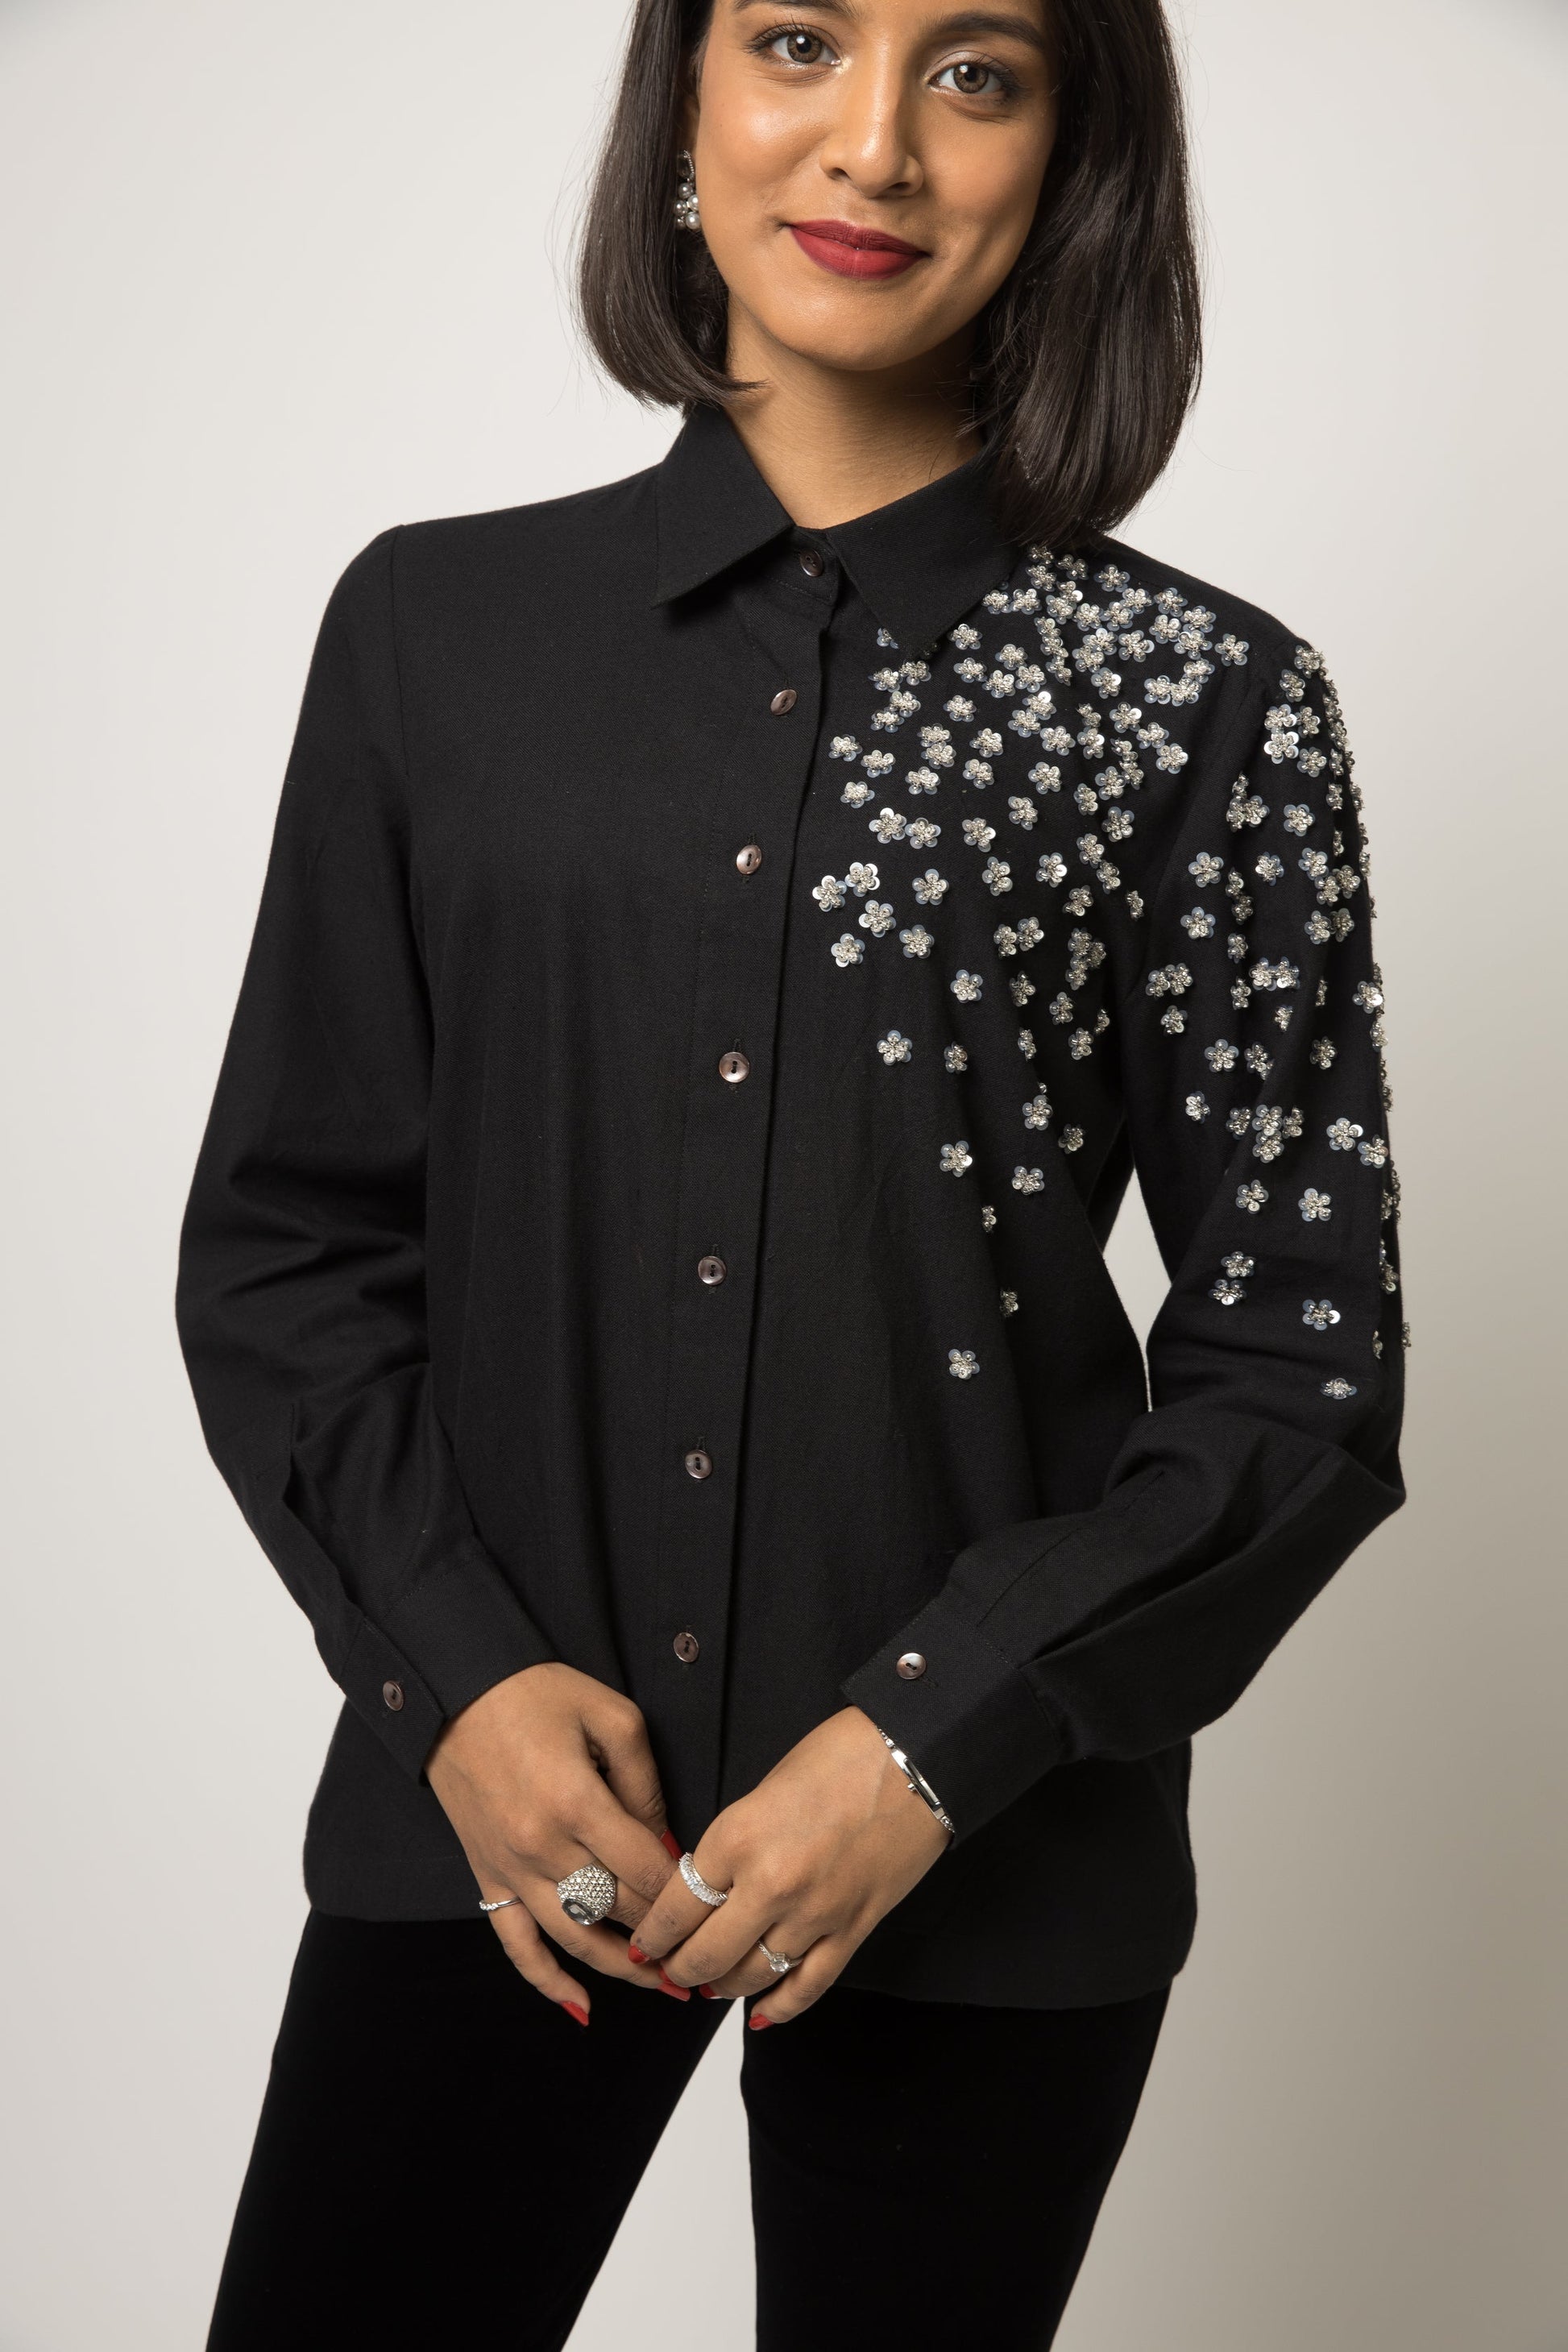 Floral Sparkle Shirt at Kamakhyaa by Anushé Pirani. This item is 100% pure cotton, Black, Embellished, Handwoven cotton, Party Wear, Shirts, The Festive Edit, Womenswear